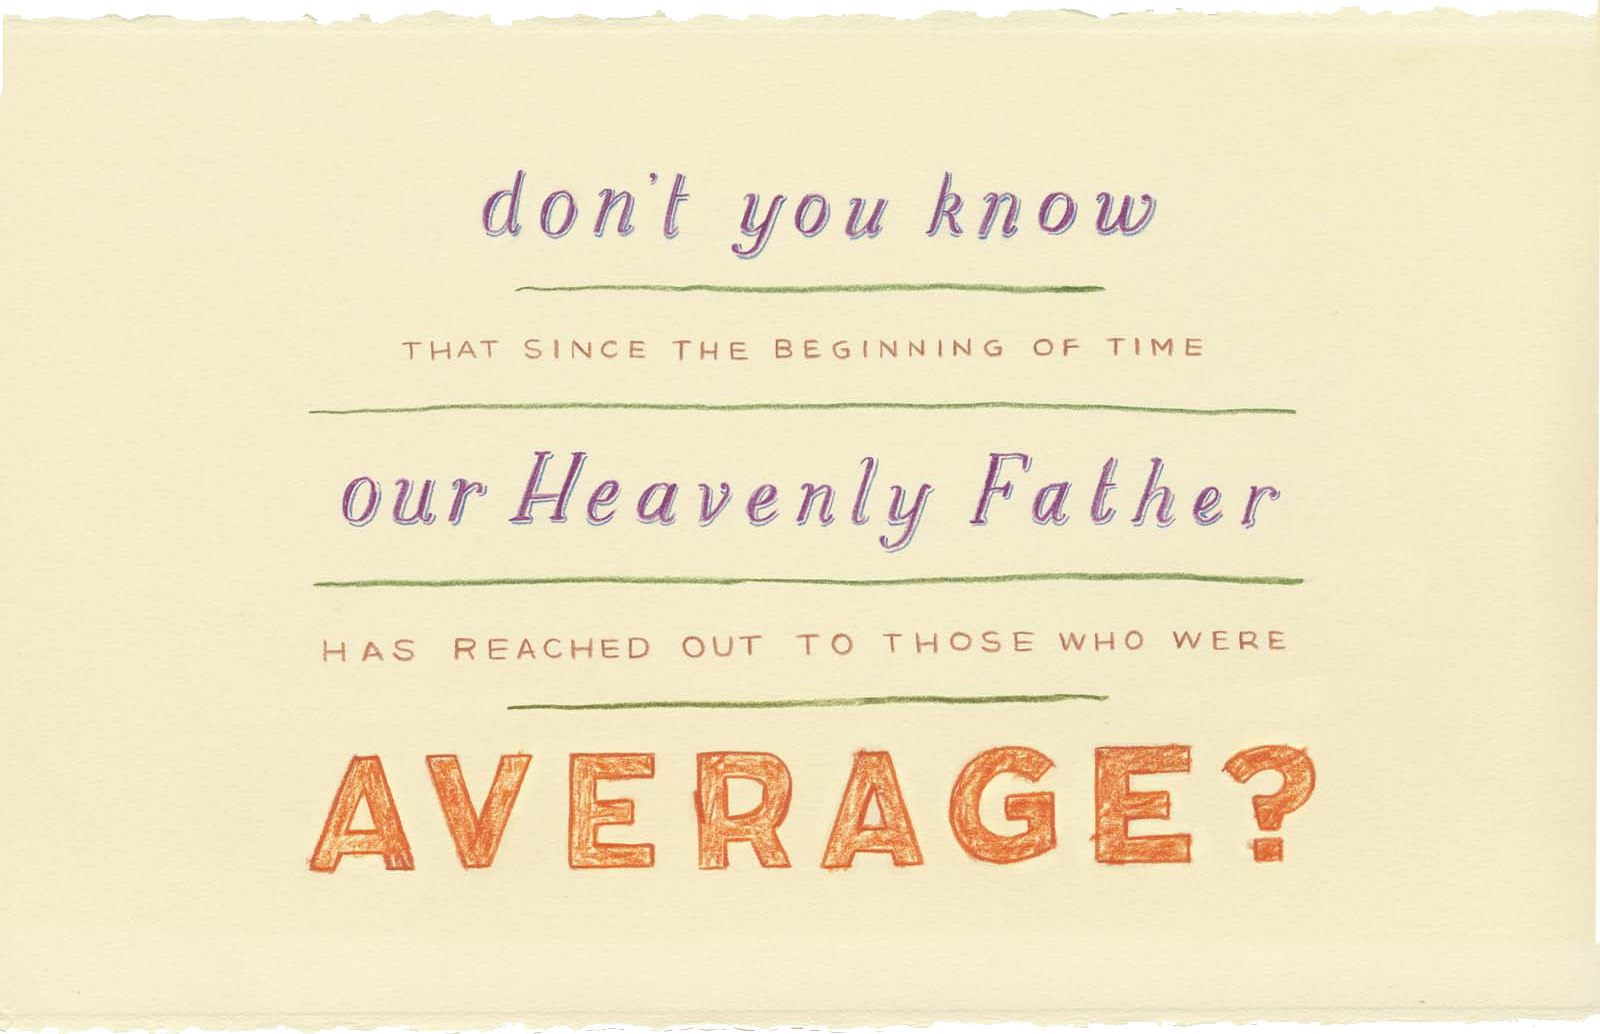 Typographic treatment of pull quote: "Don't you know that since the beginning of time our Heavenly Father has reached out to those who were average?"